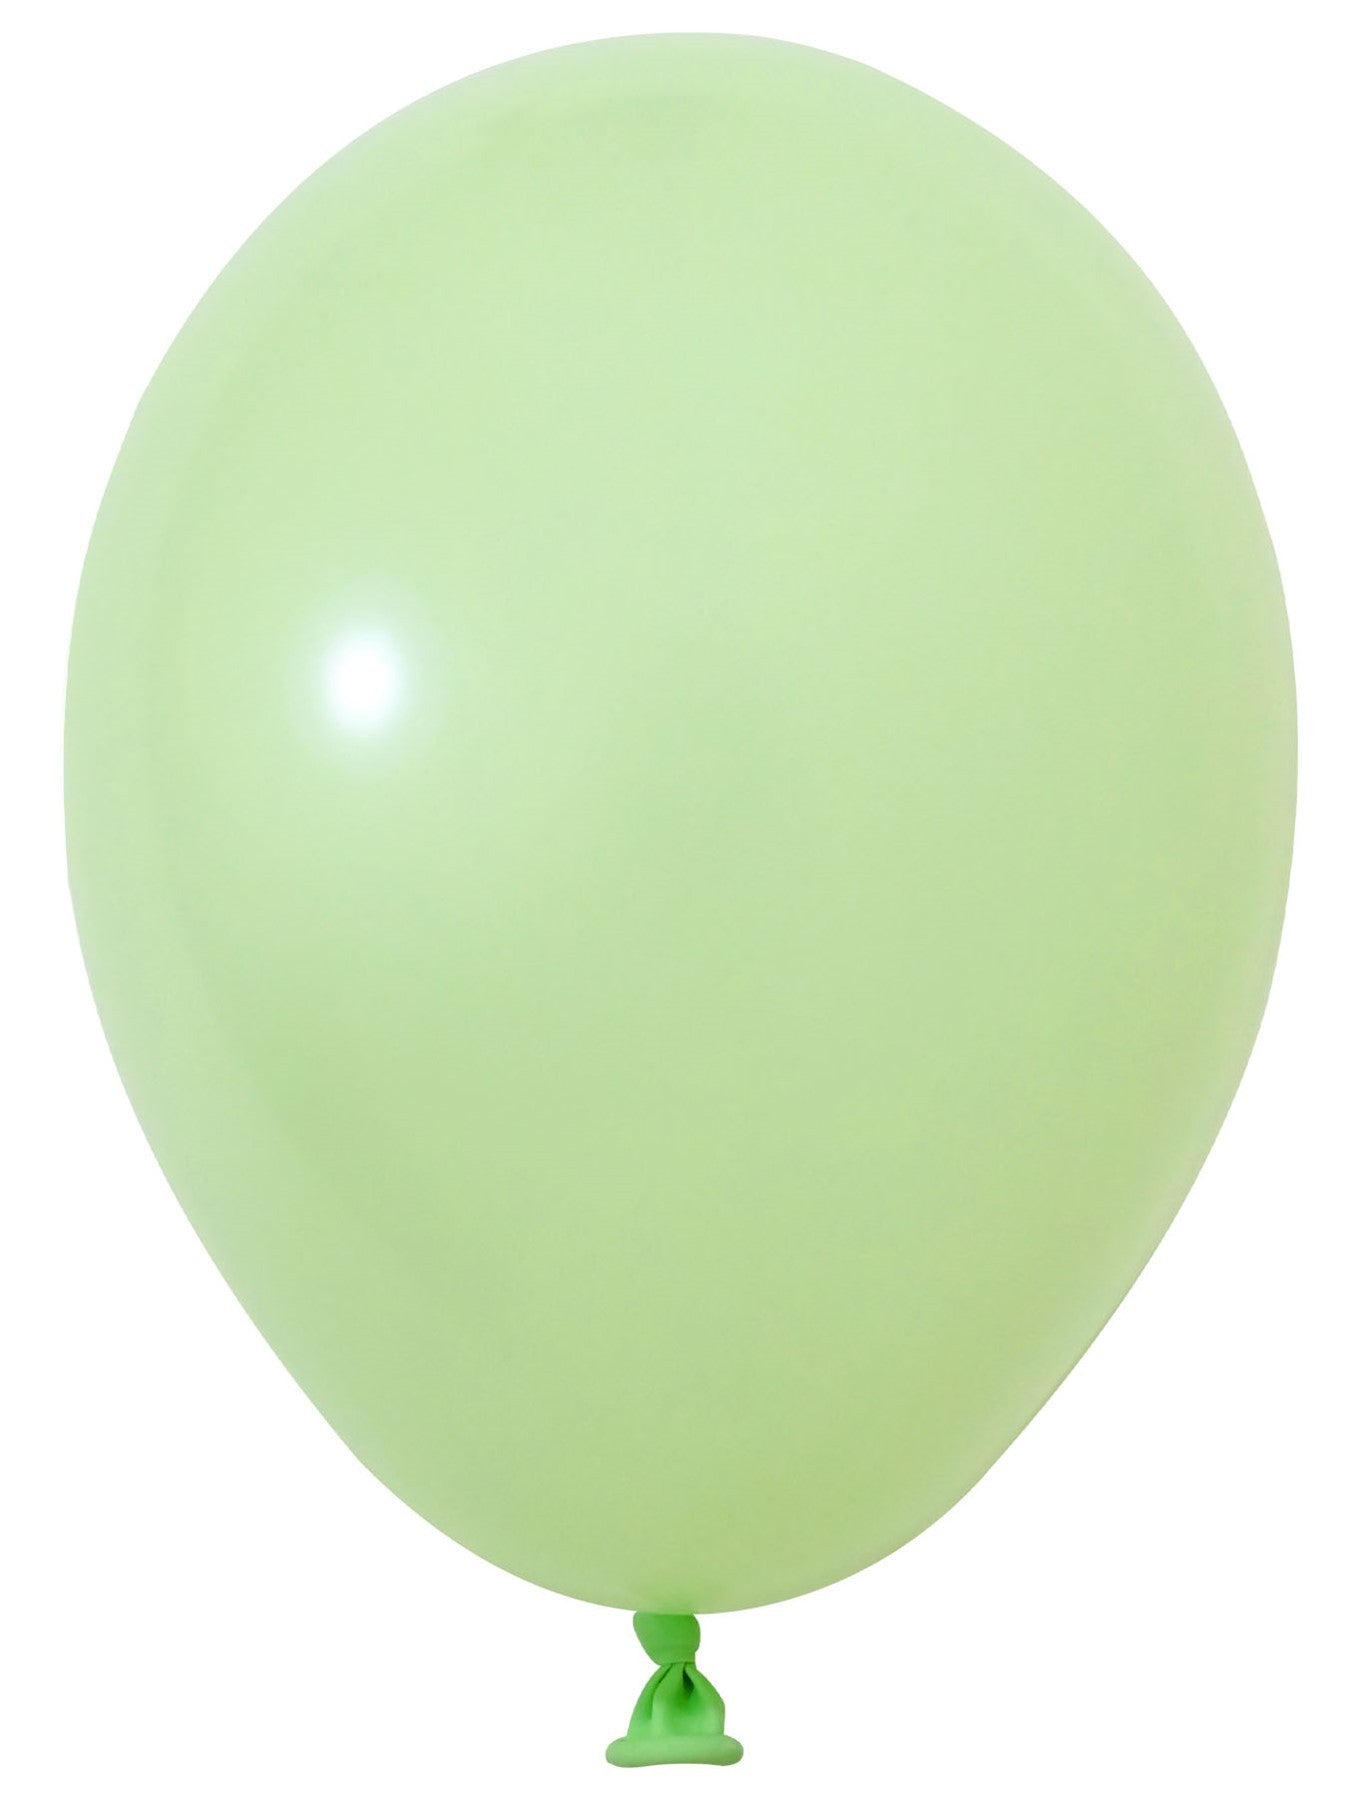 View Macaron Green Latex Balloon 5inch Pack of 100 information